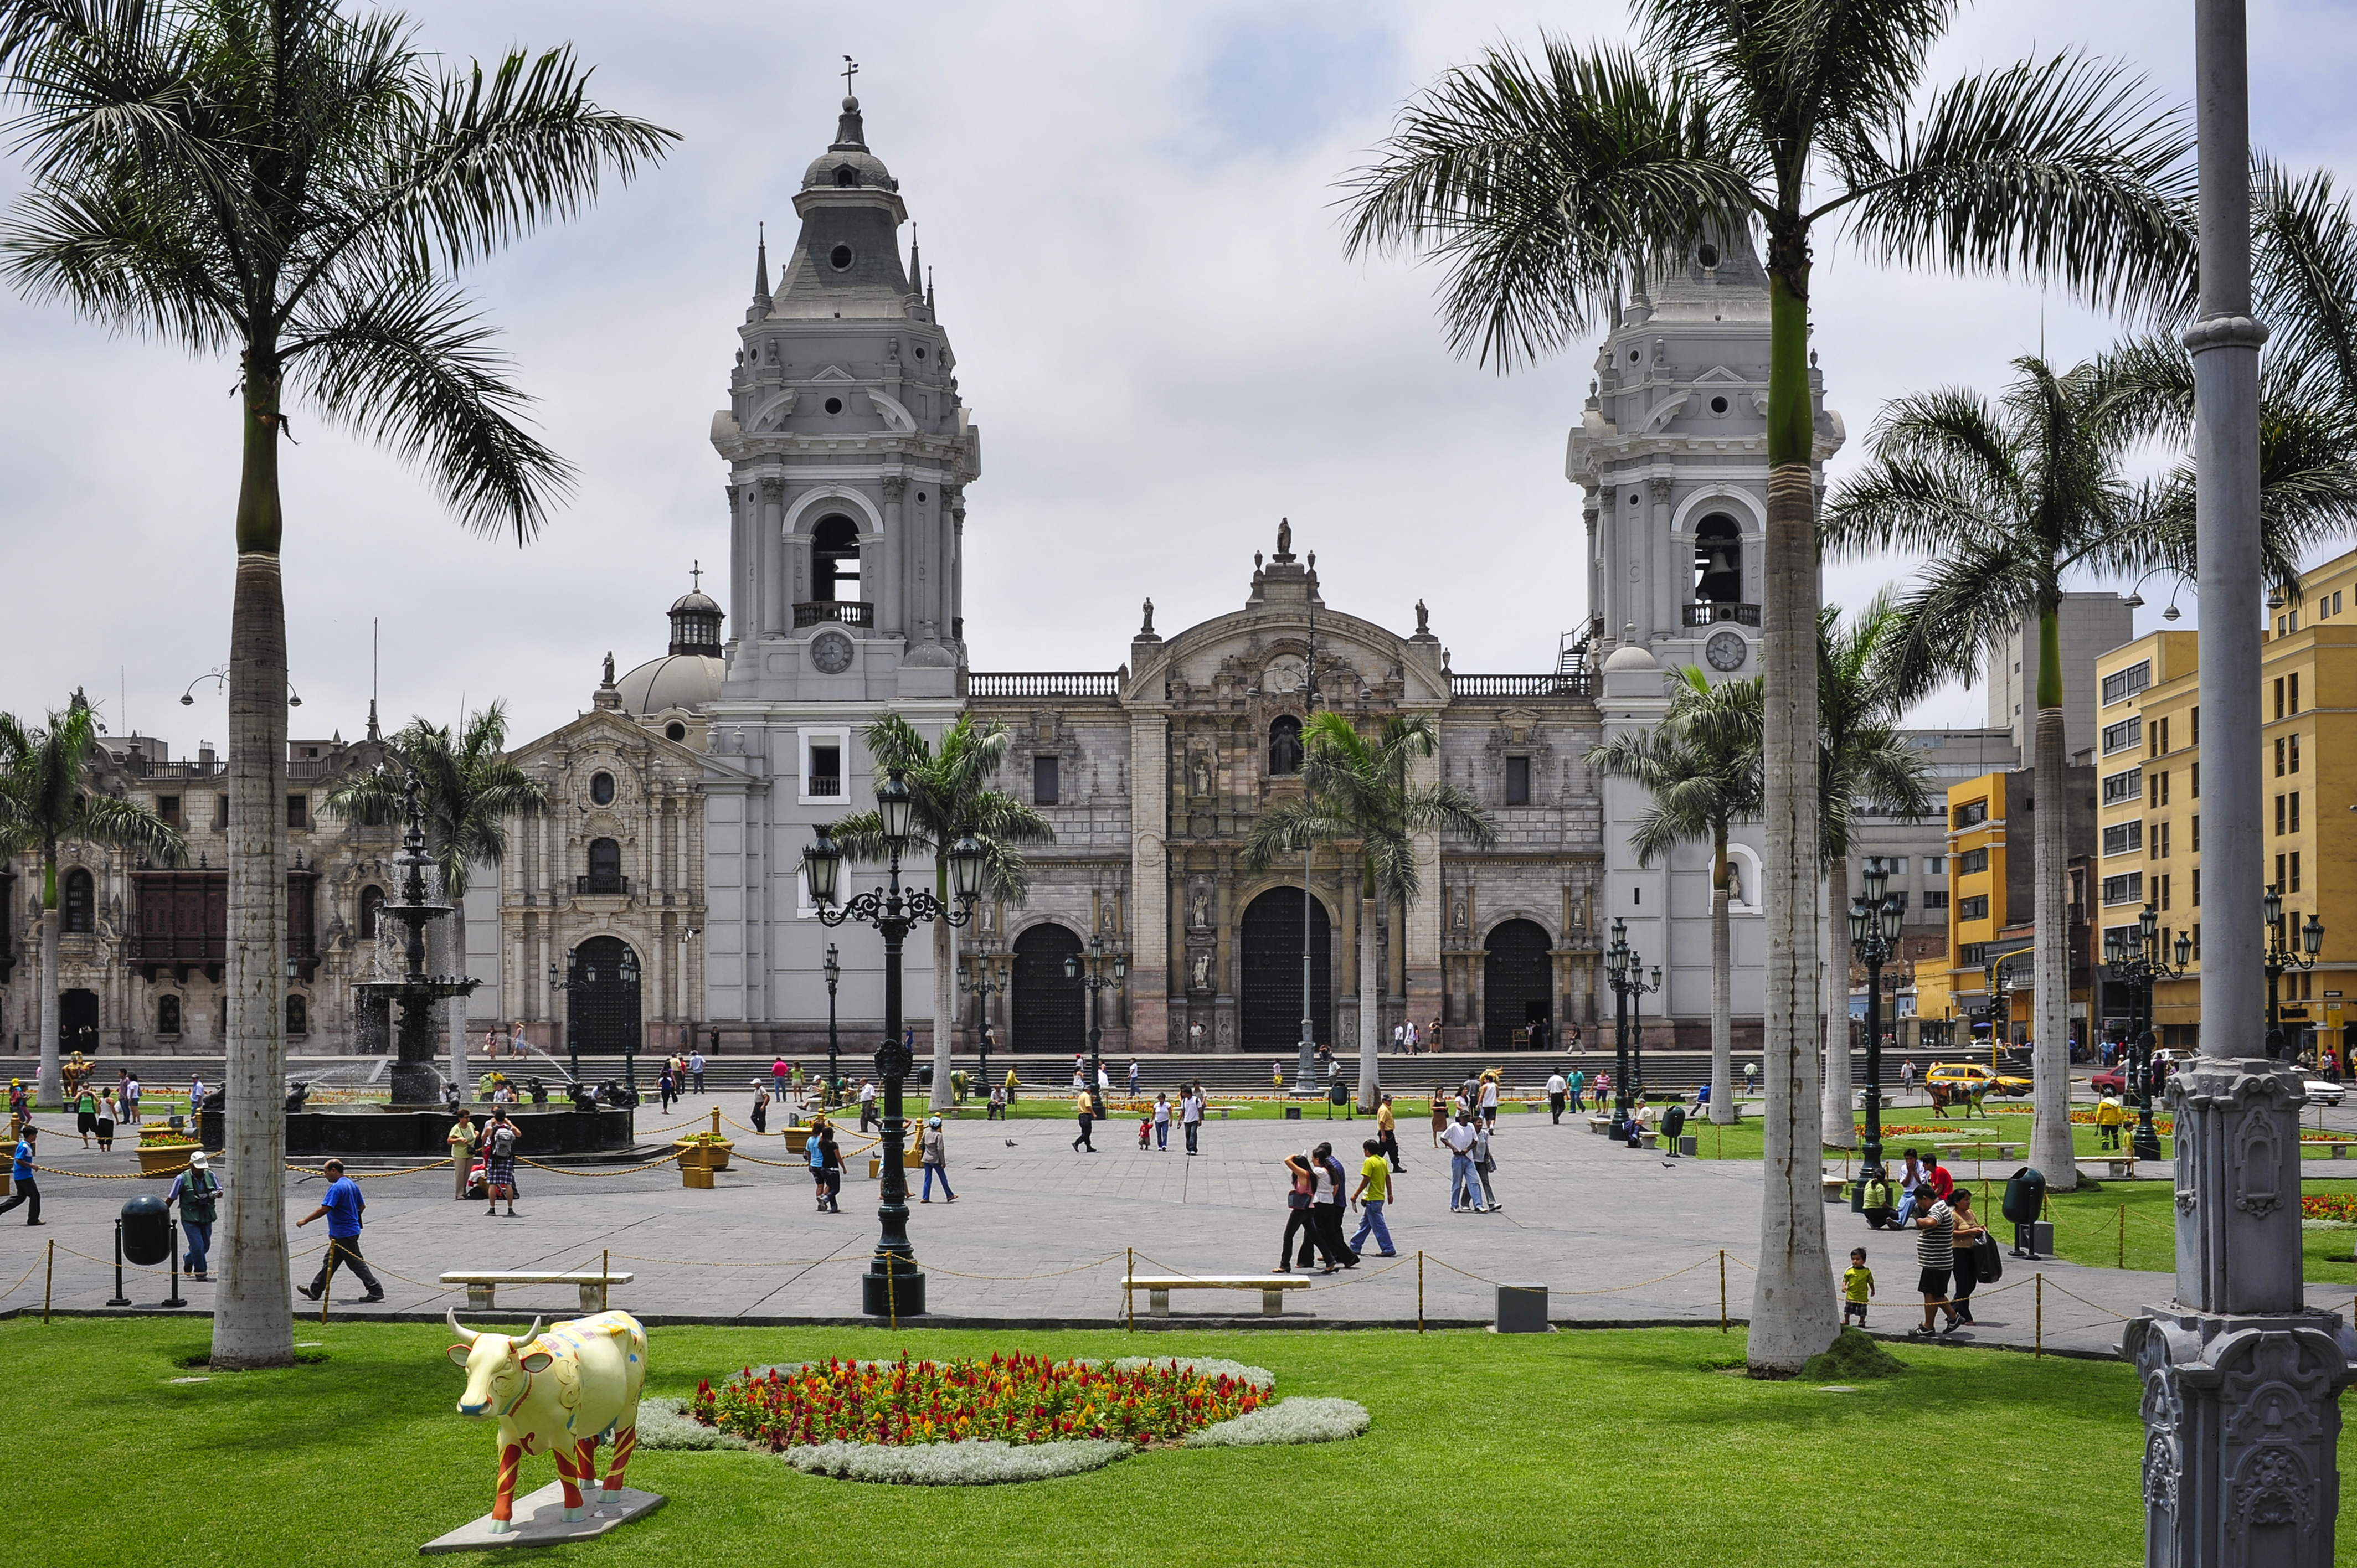 Cathedral at Plaza de Armas is located in the Historic Centre of Lima, Peru